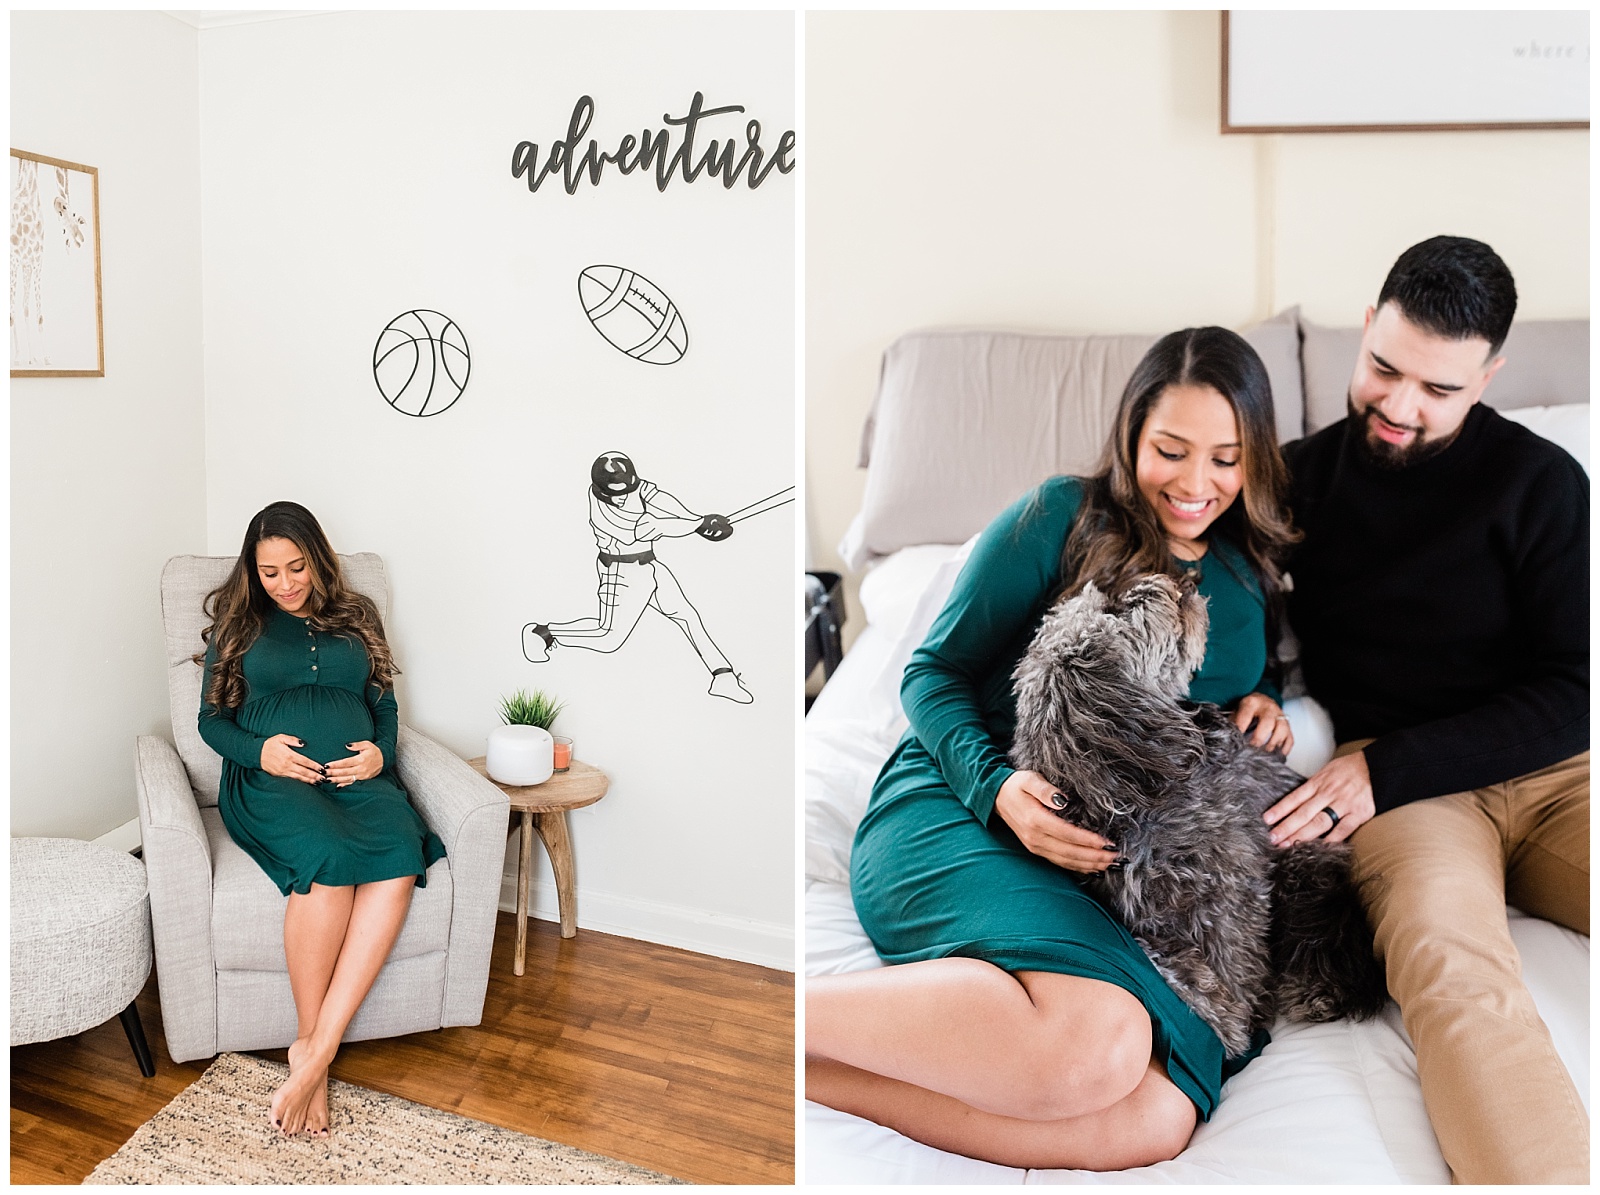 In Home Maternity Session, Nursery, Baby, New Parents, Maternity Shoot, Pregnant, Pregnancy Photos, New Jersey, Photographer, Baby Boy, Sports, adventure, wall decor, dog, pet, photo